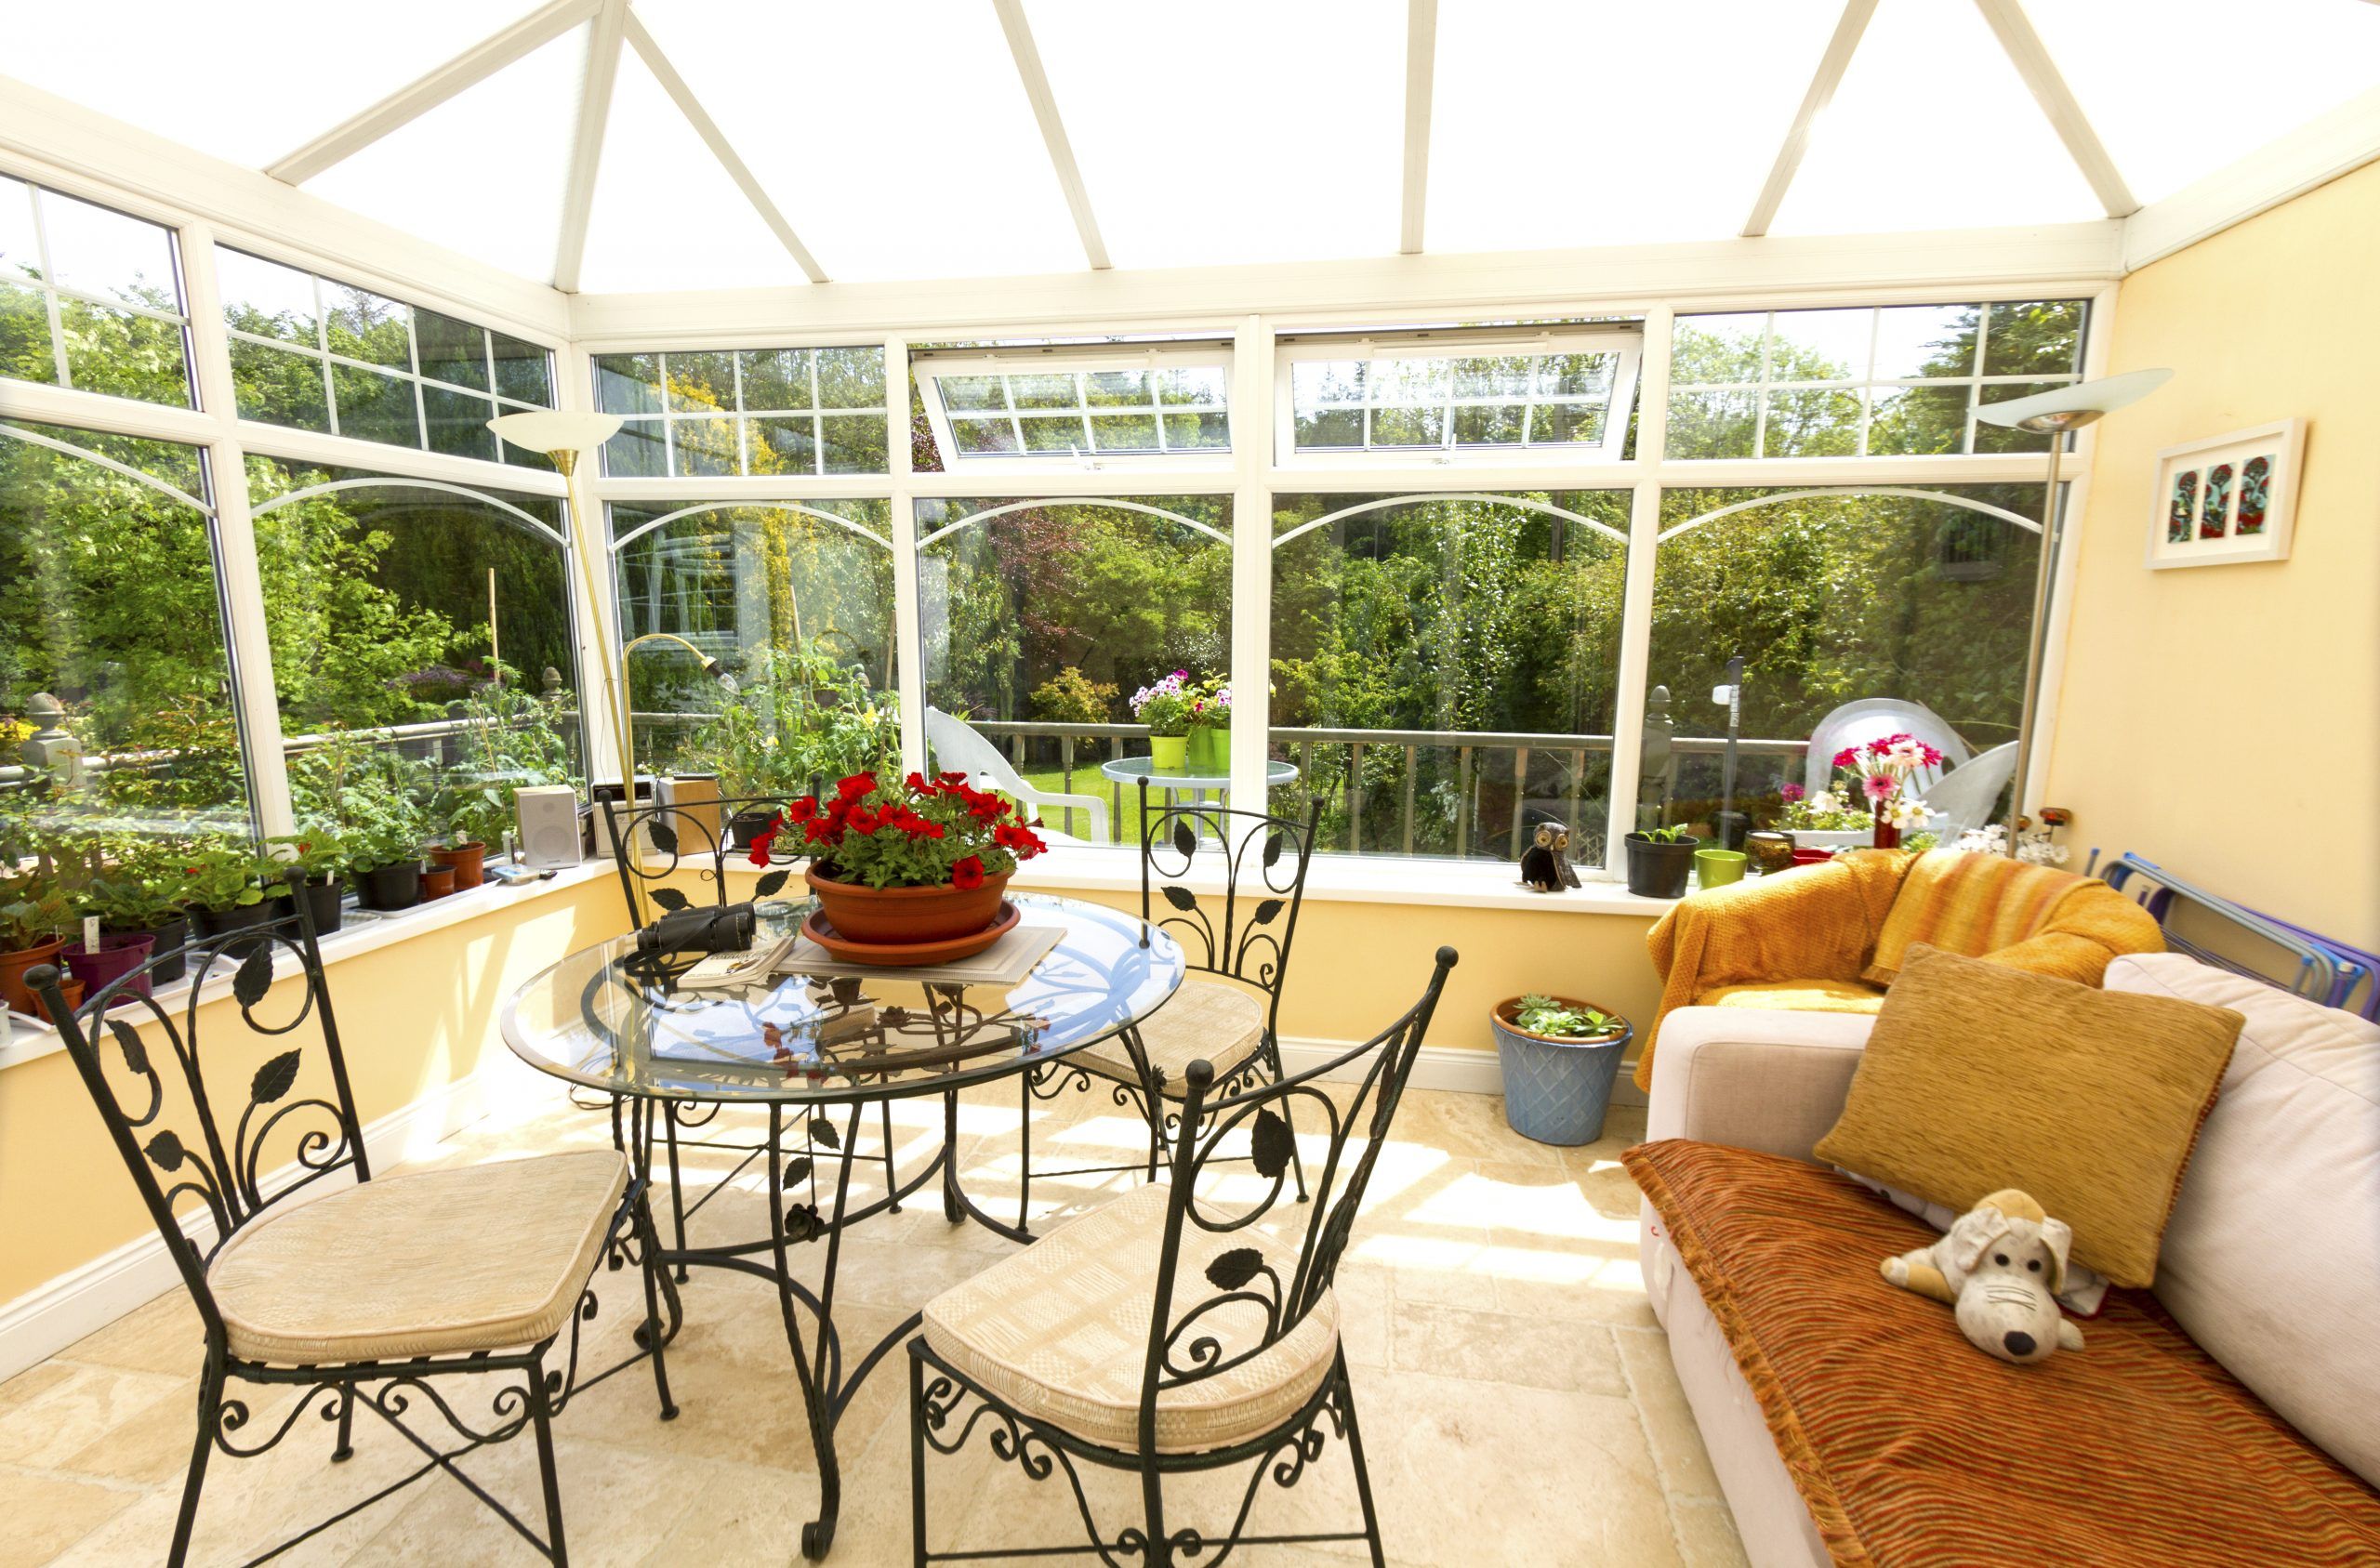 Interior of a conservatory or sunroom